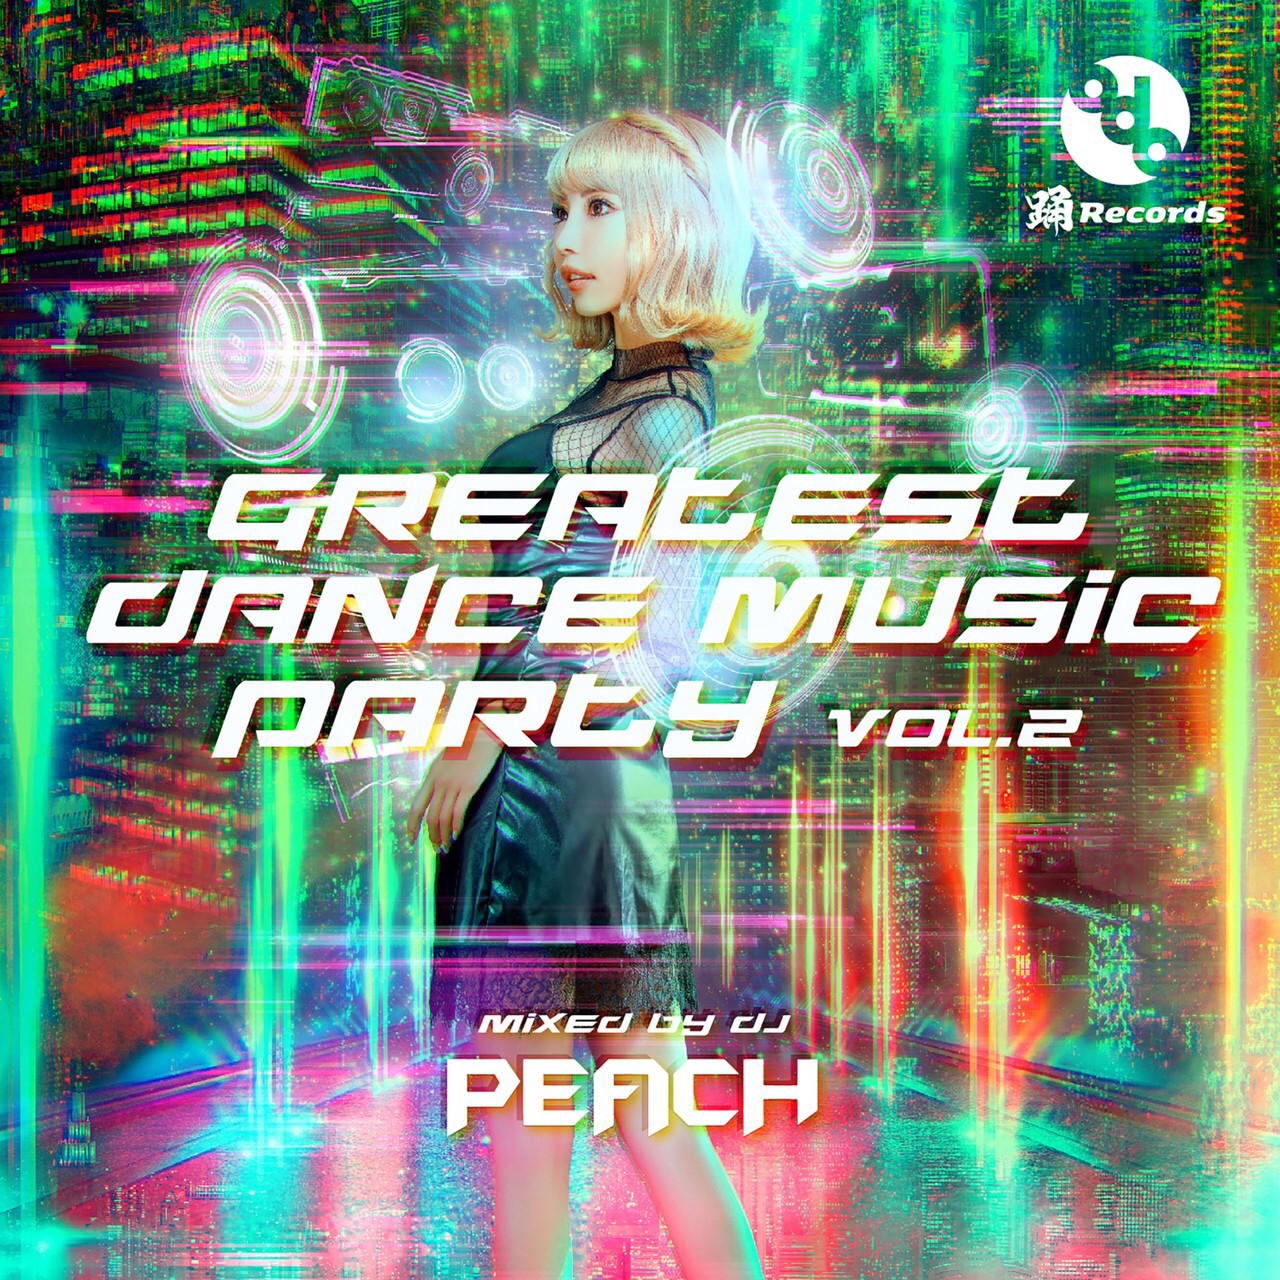 GREATEST DANCE MUSIC PARTY vol.2 (Mixed by DJ PEACH)